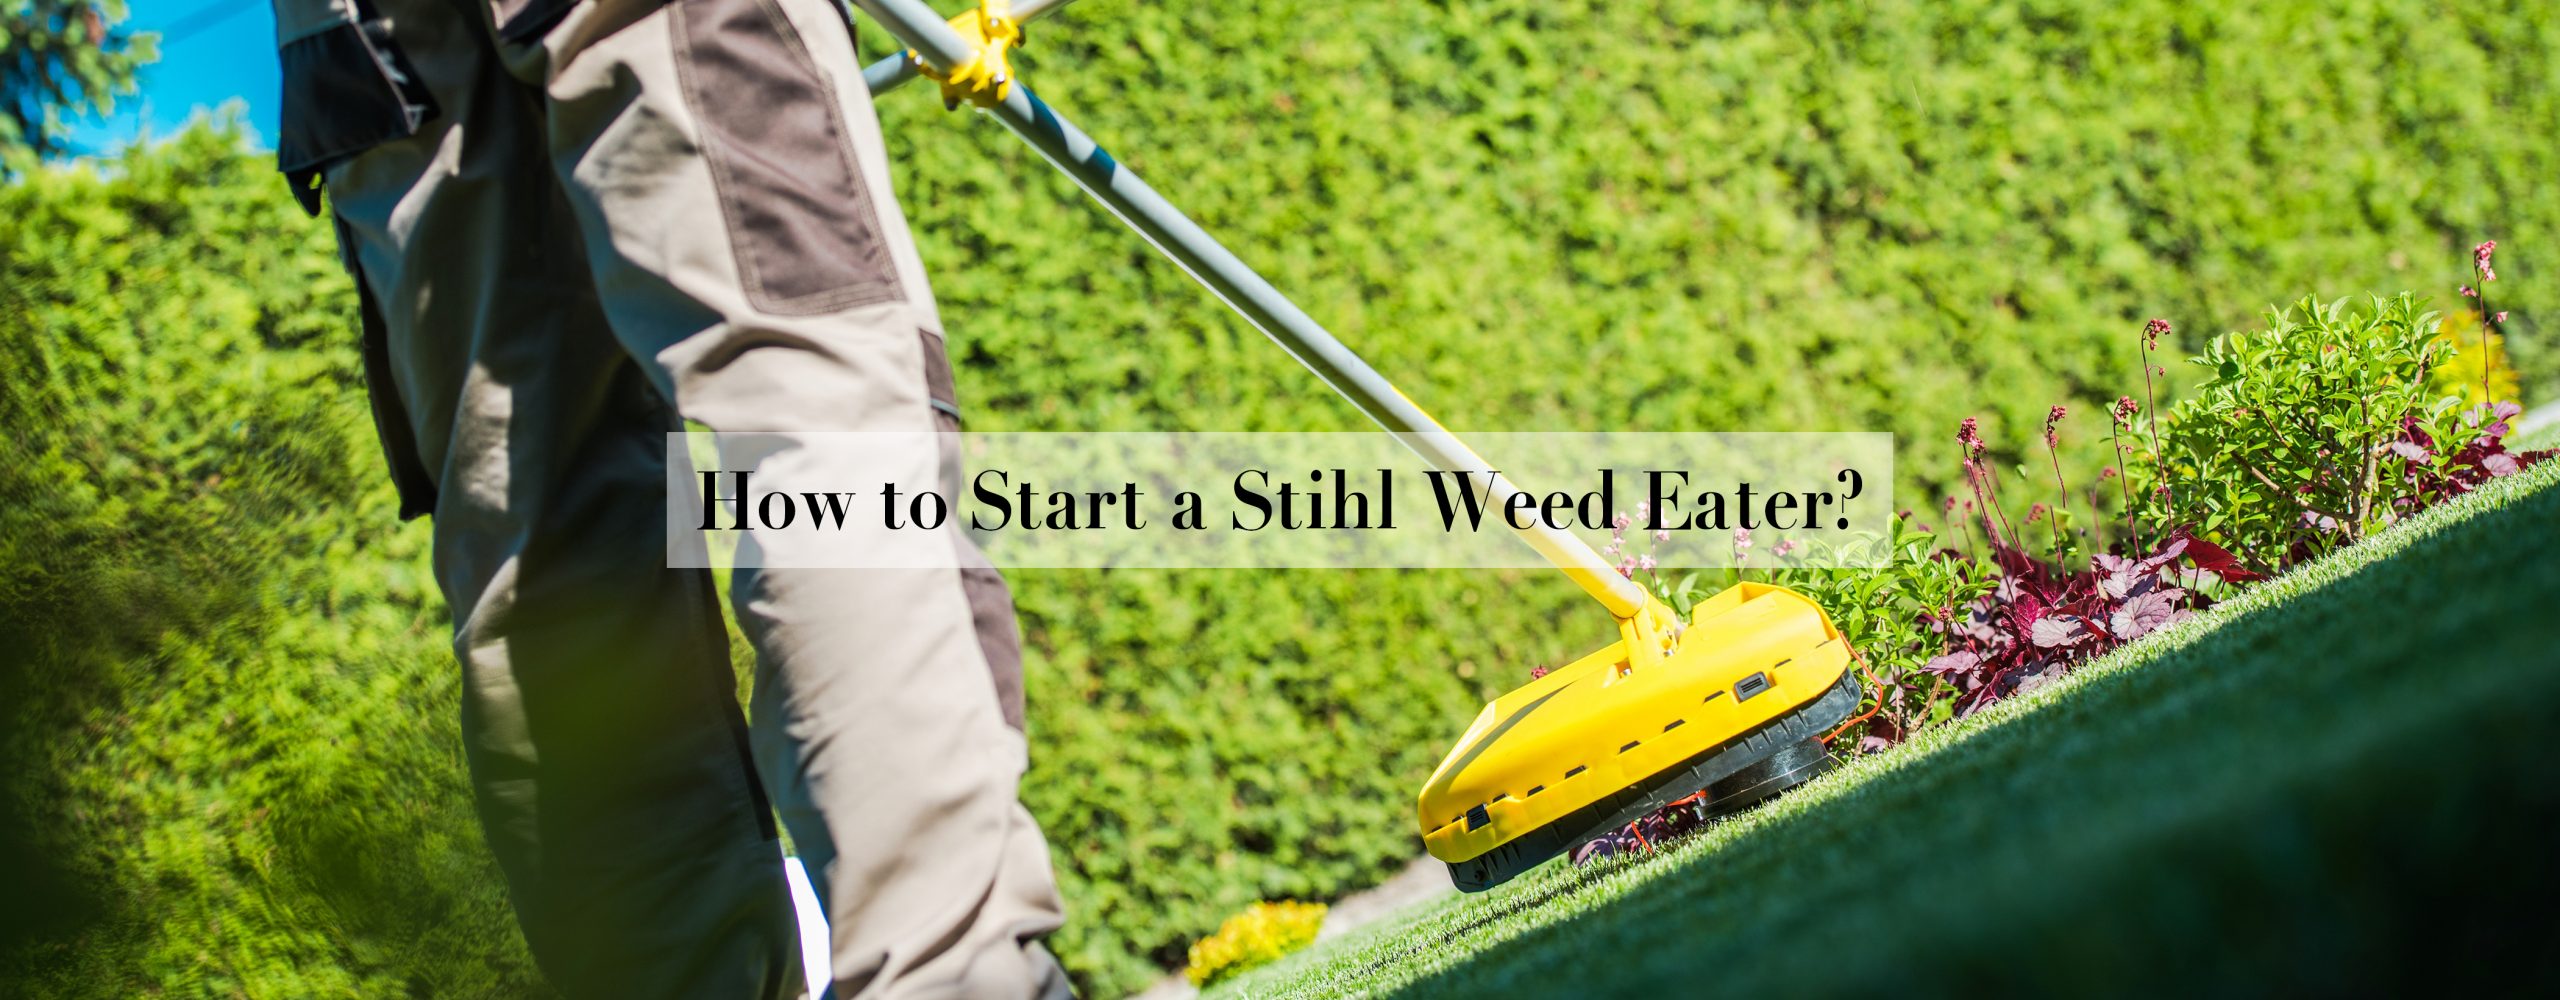 how to start a stihl weed eater ft